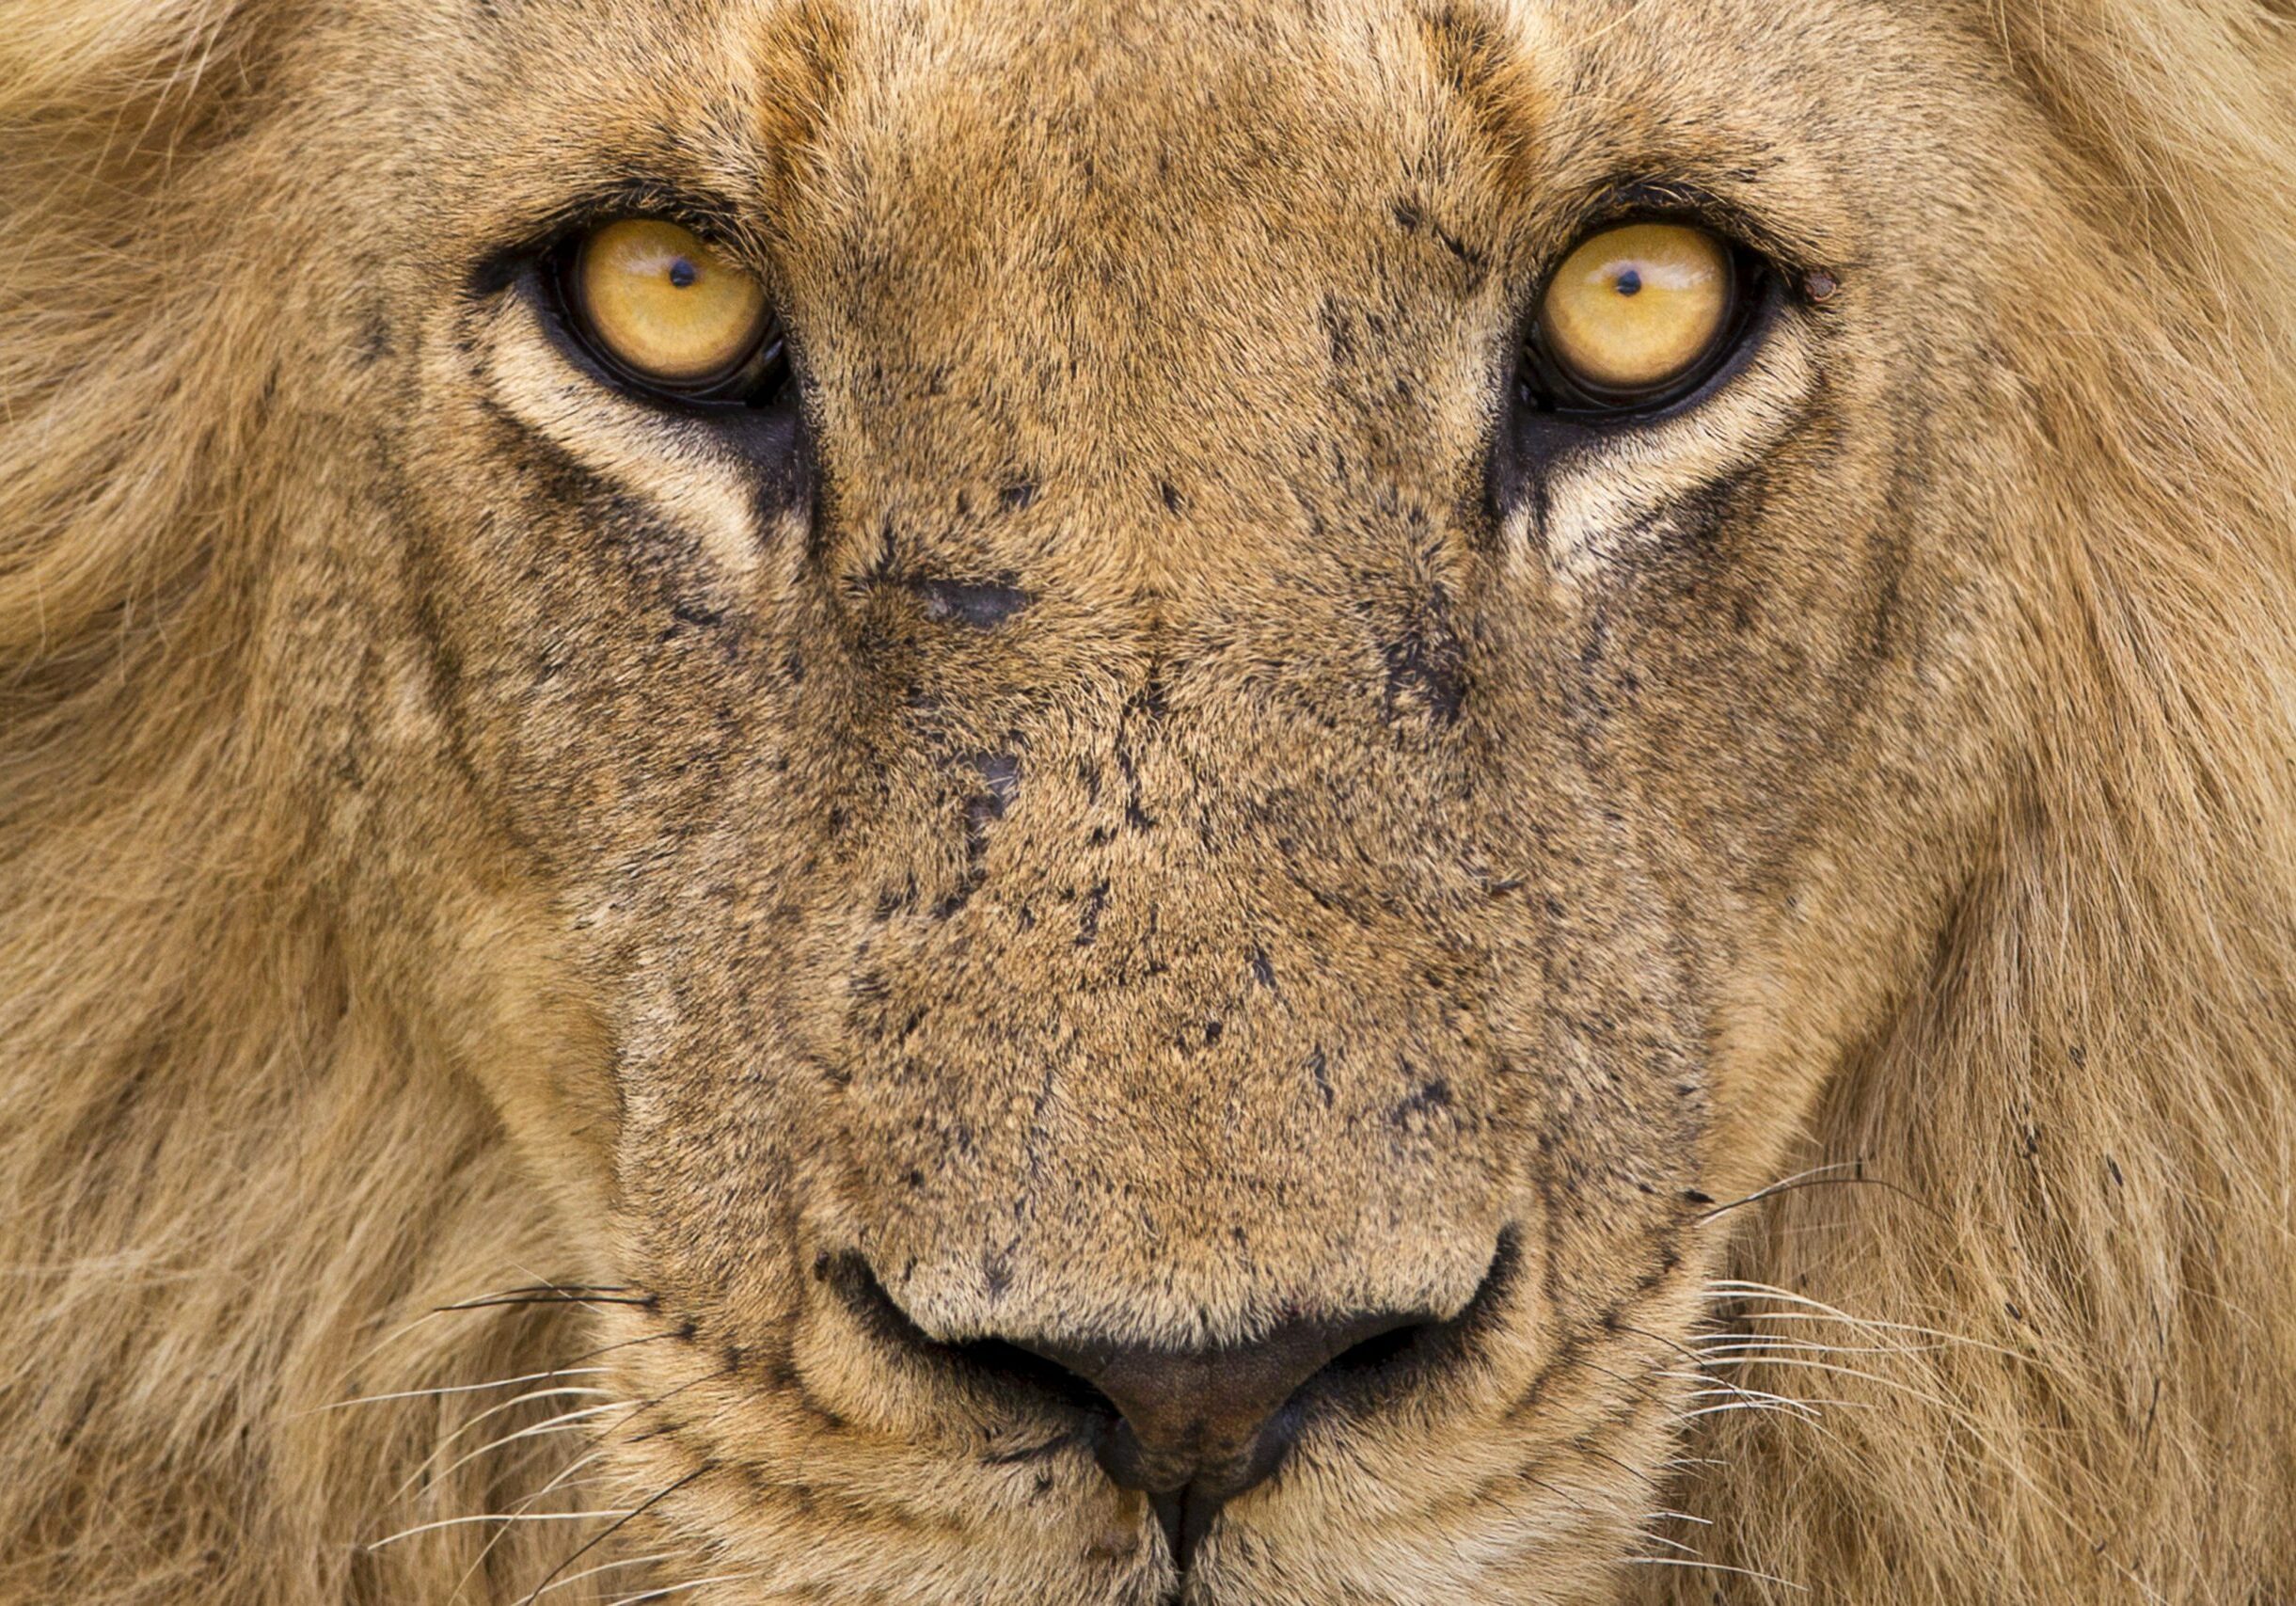 A close up portrait of a male Lion captured in Northern Kruger, South Africa.